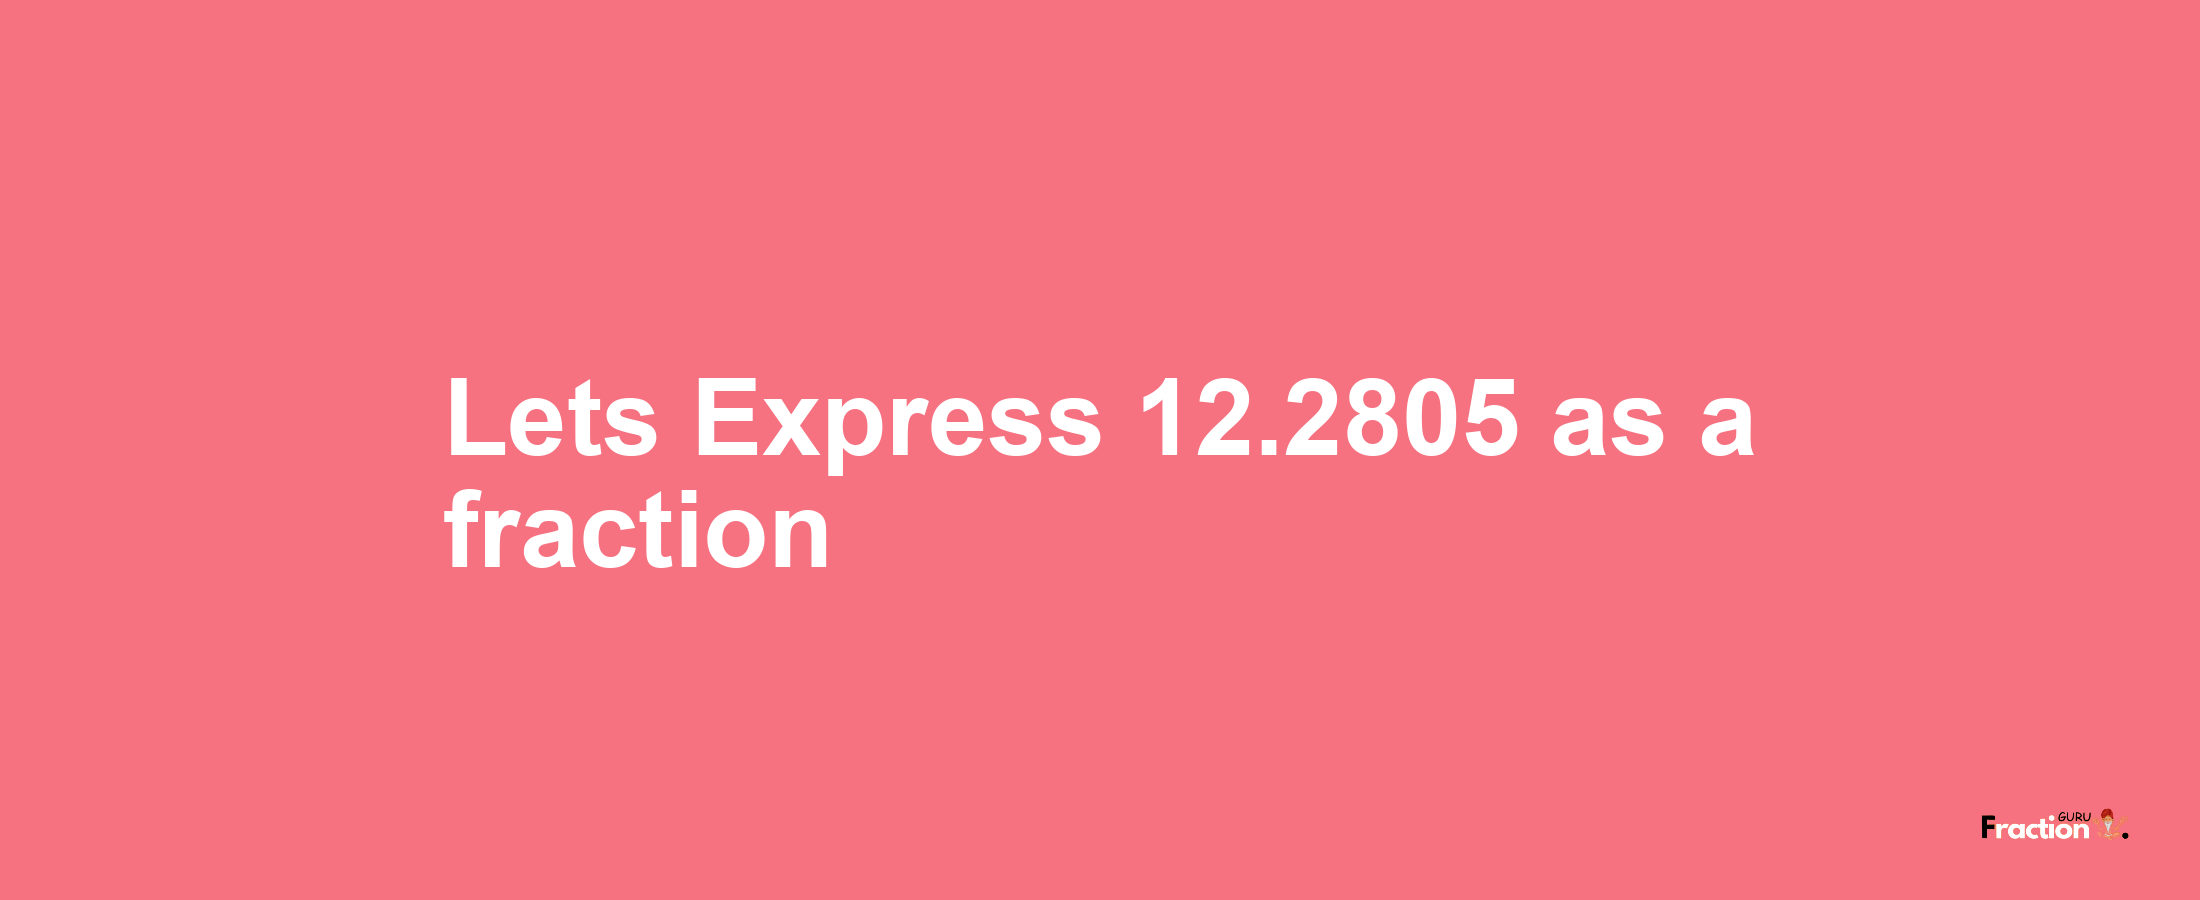 Lets Express 12.2805 as afraction